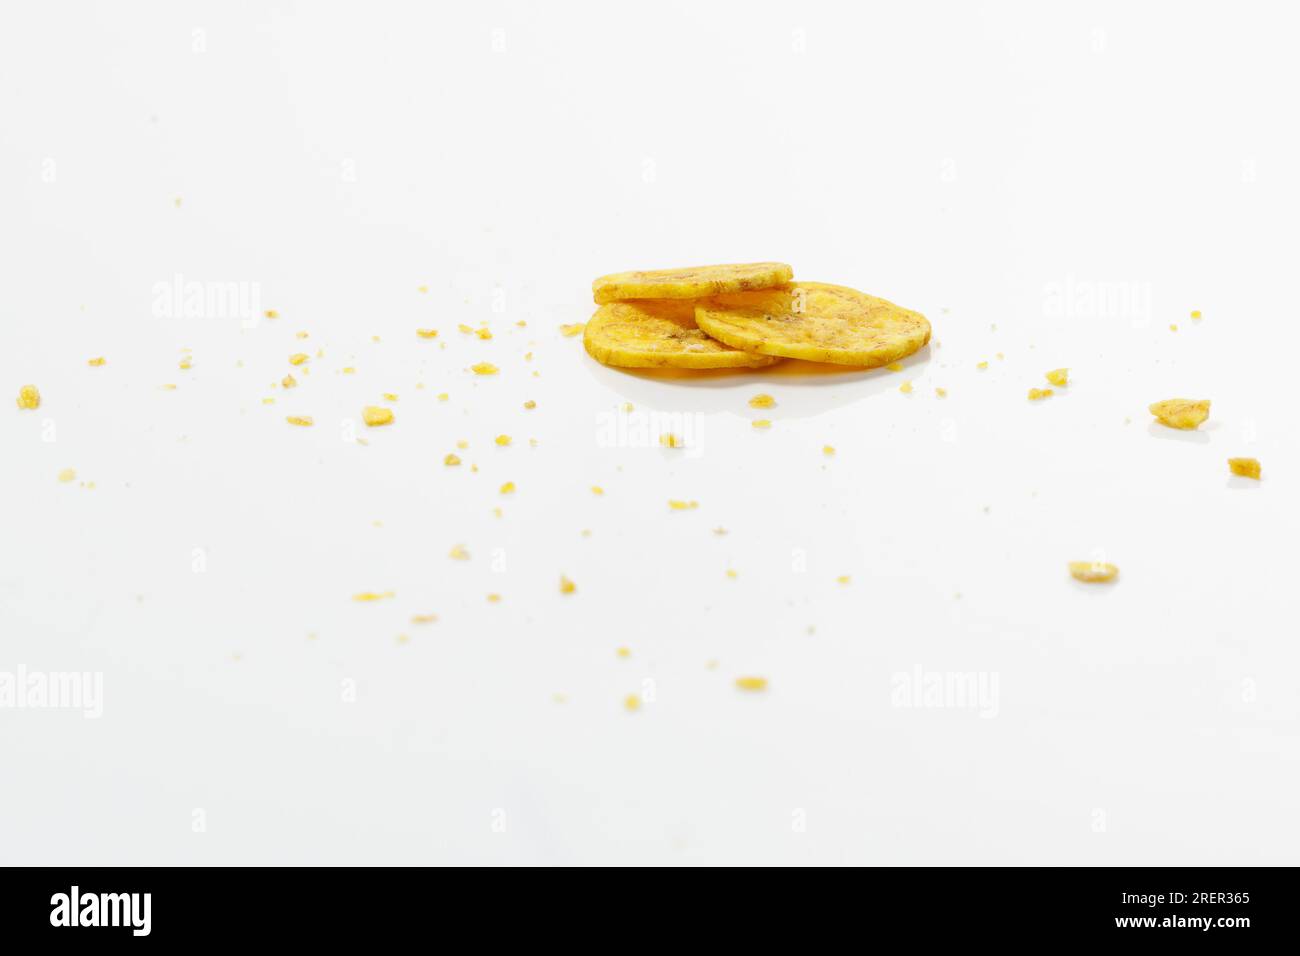 Kerala chips or Banana chips, cult snack item of Kerala,Isolated image with white background Stock Photo